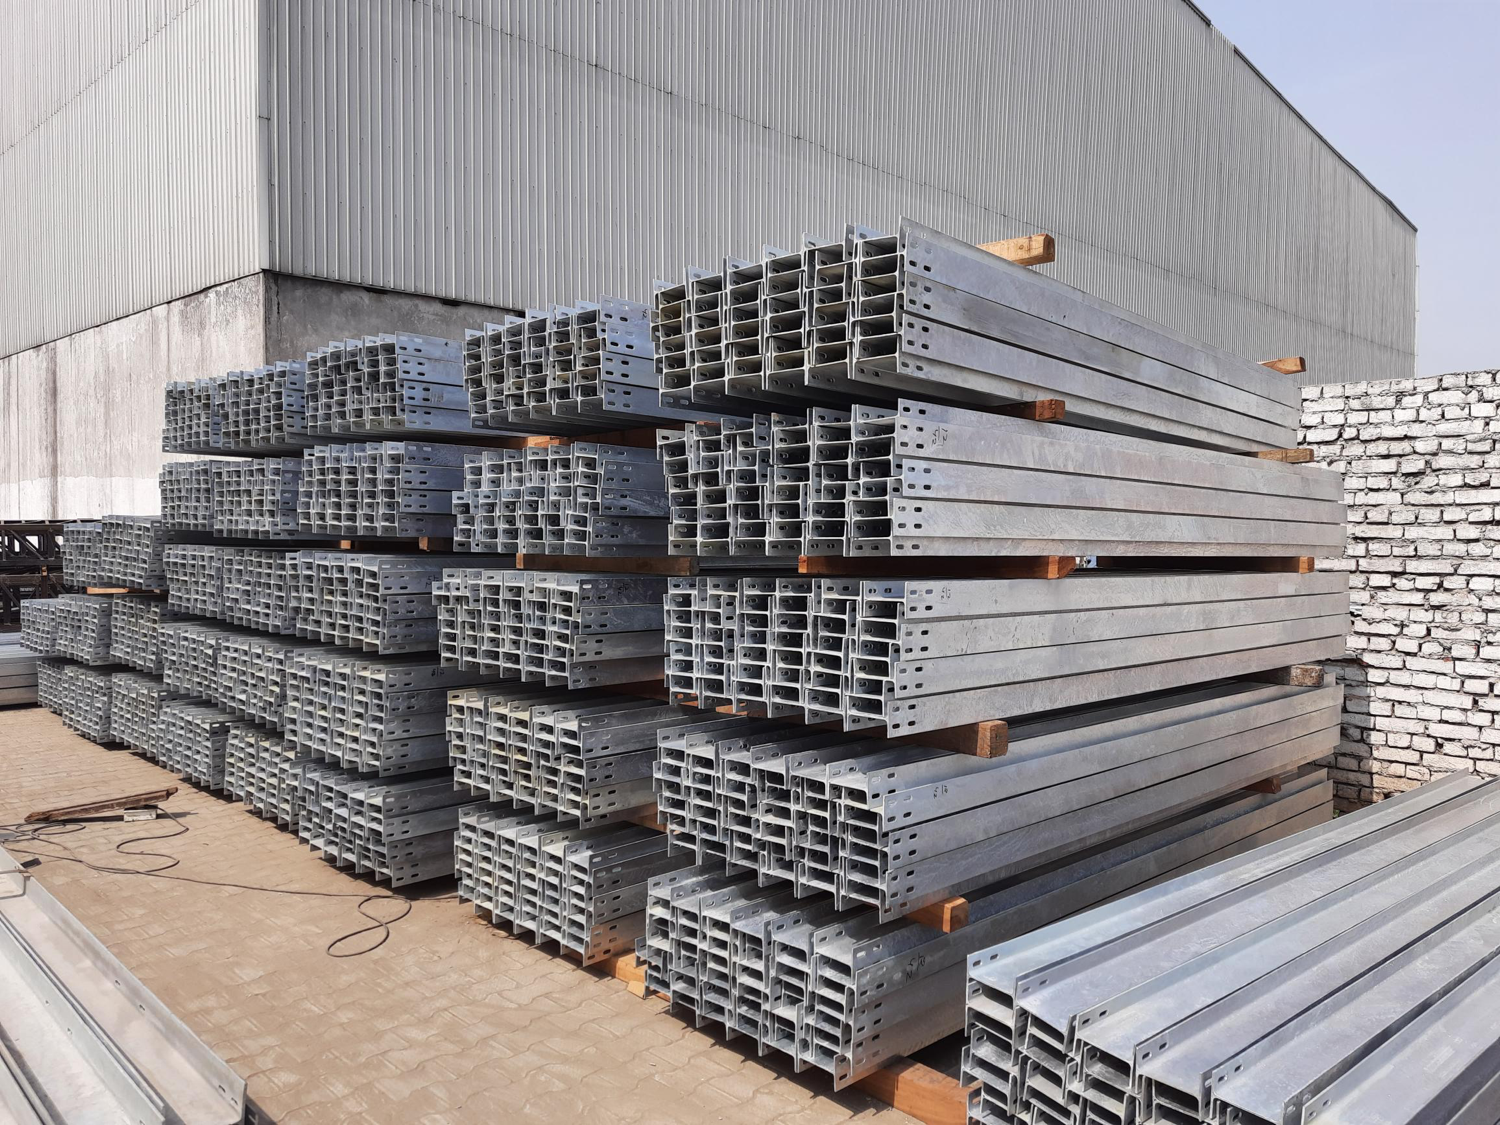 Unimacts is a manufacturer of steel piles